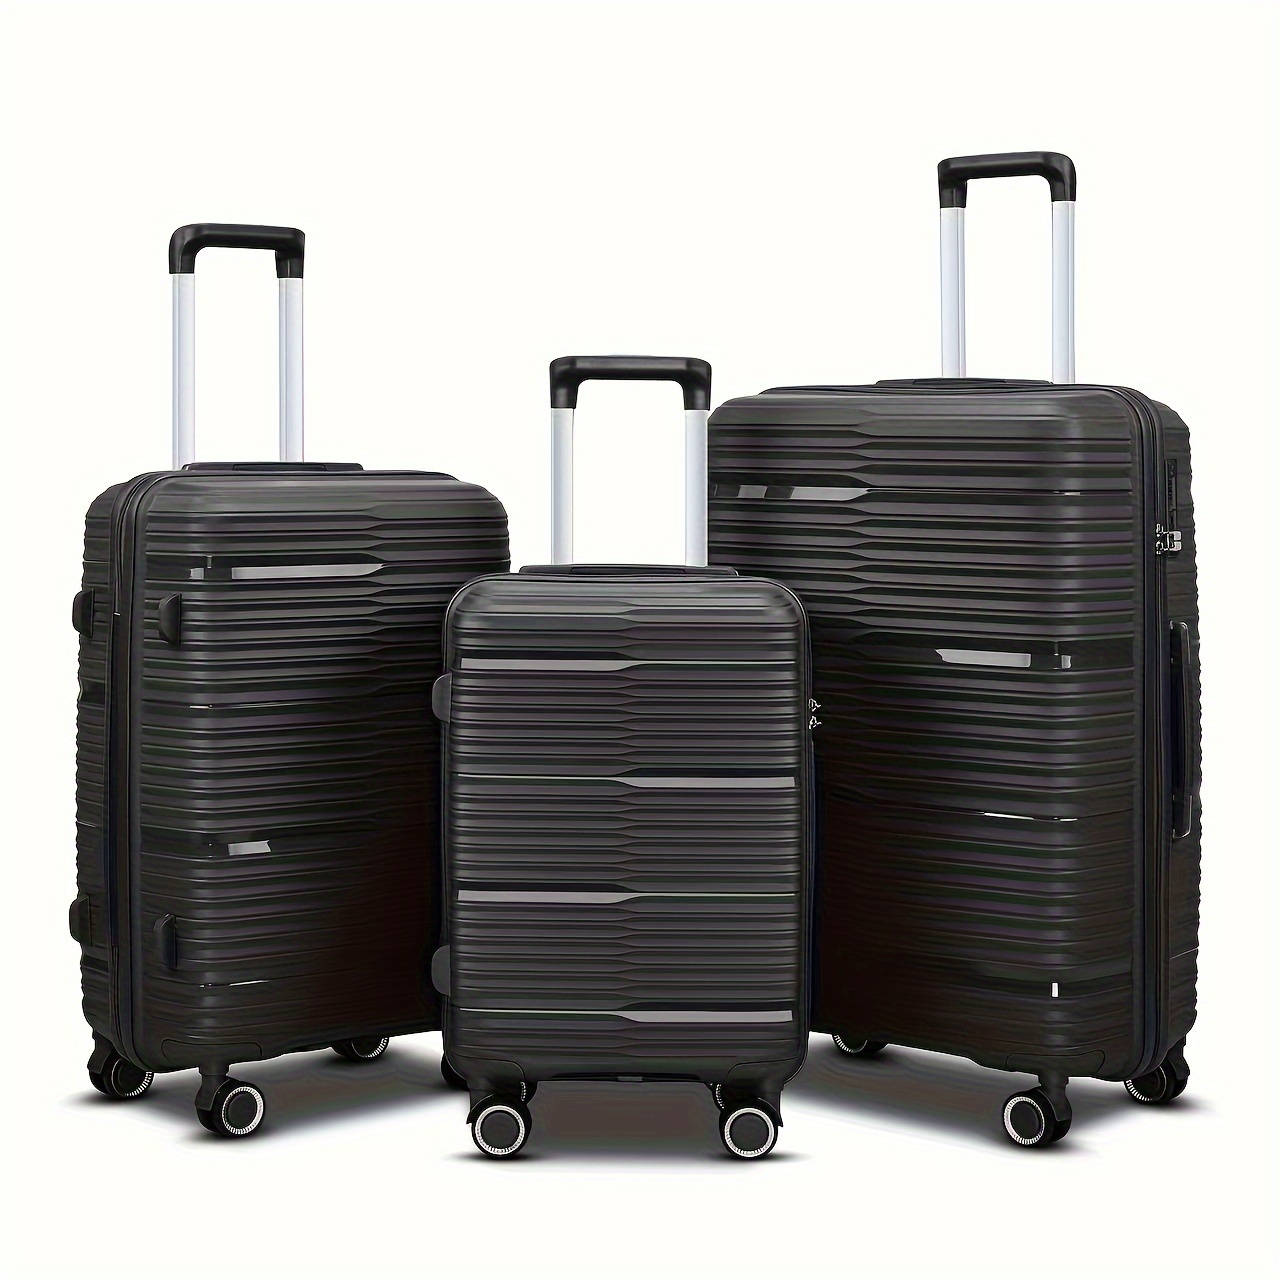 travel luggage 3 piece set with spinner wheels and password lock portable large capacity luggage suitcase perfect travel luggage case set 20in 24in 28in